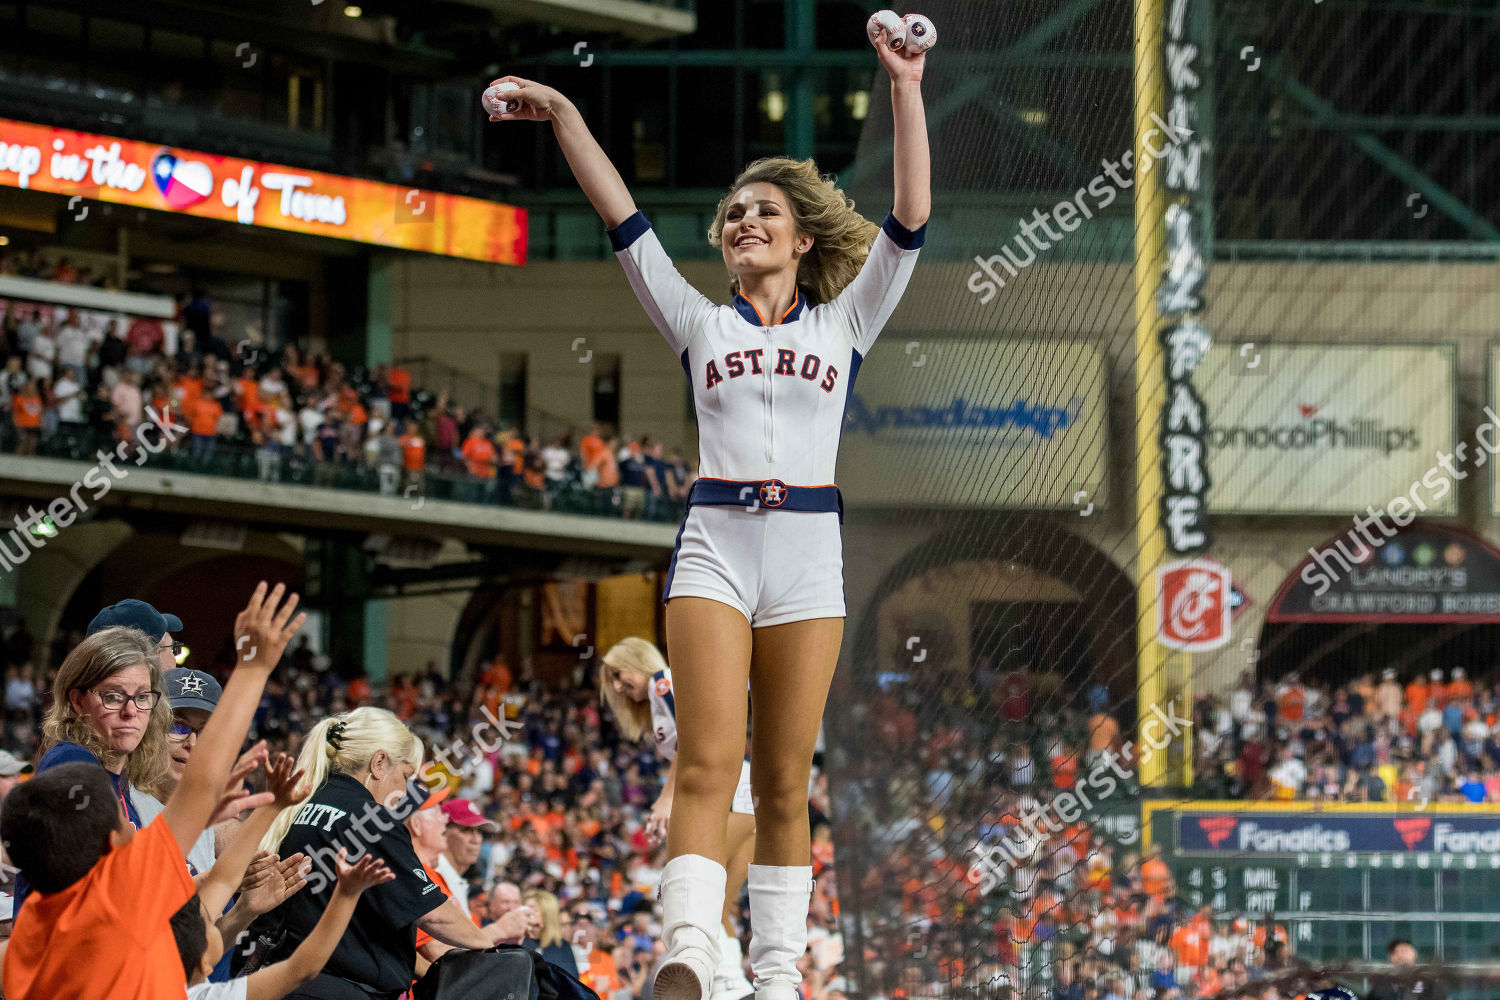 Member Astros Shooting Stars Performs During Editorial Stock Photo